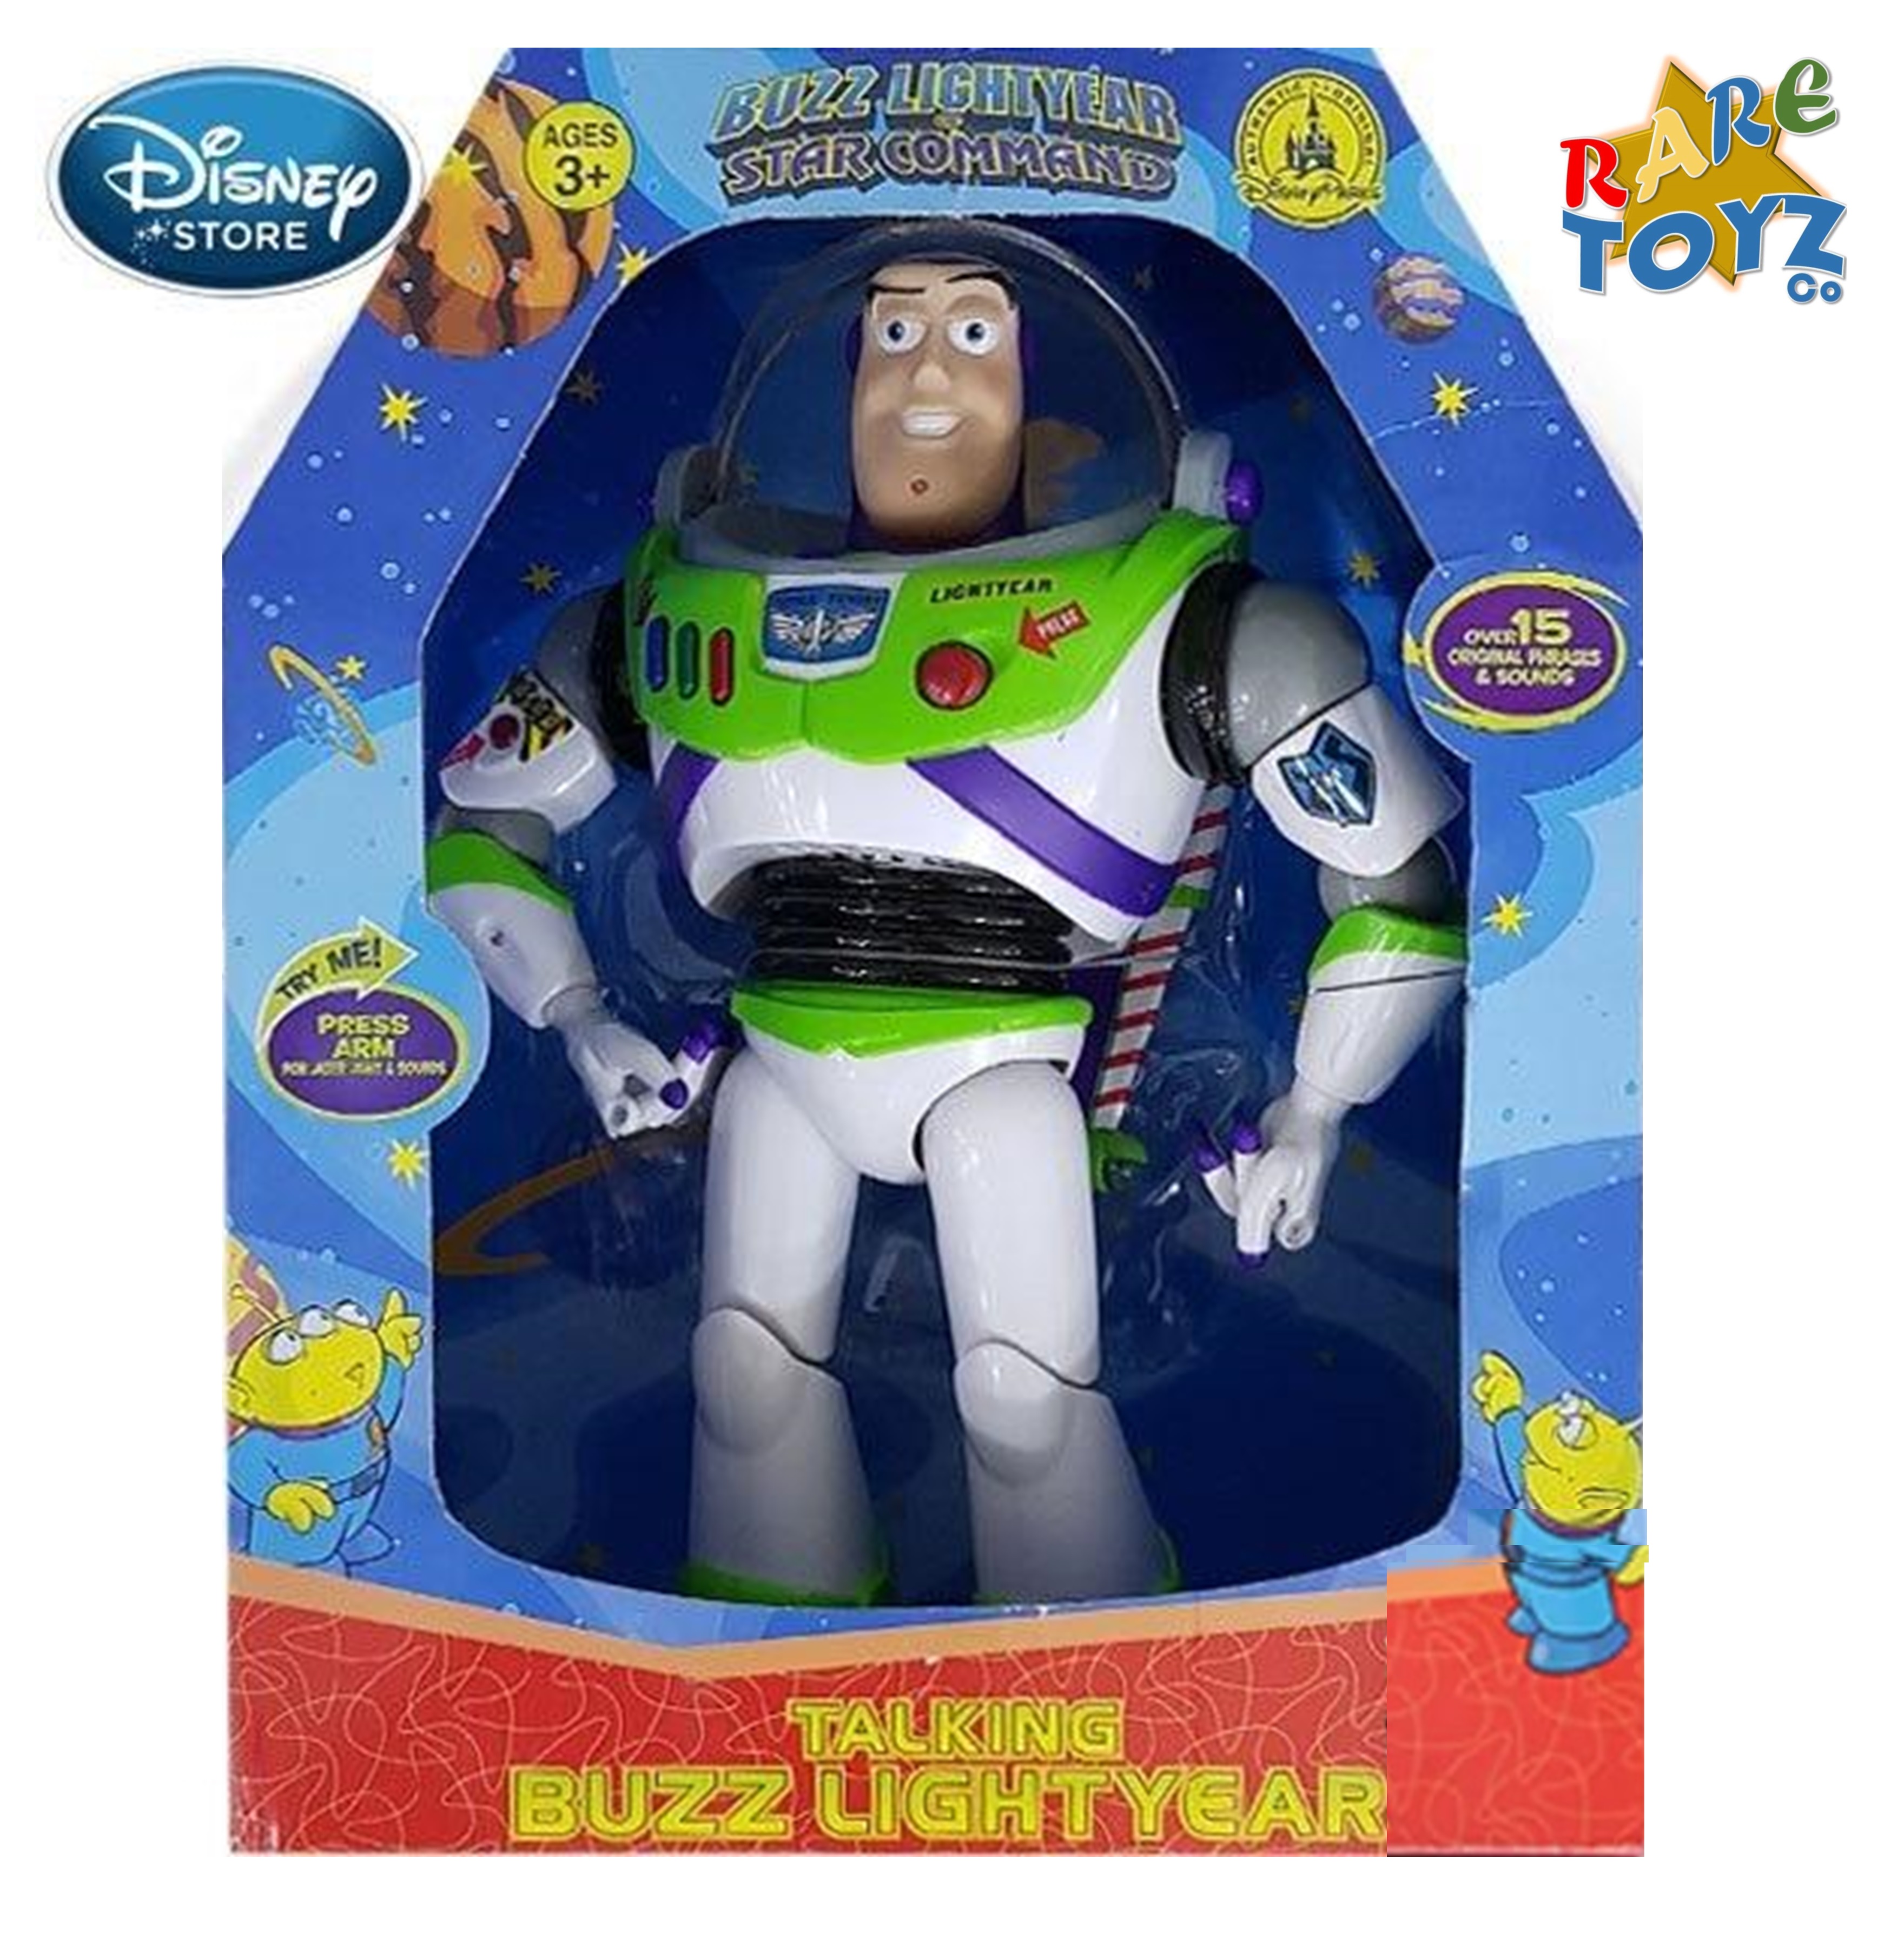 Buzz Lightyear Toy Story Talking Action Figure Movie Sze Authentic Original By Disney Store